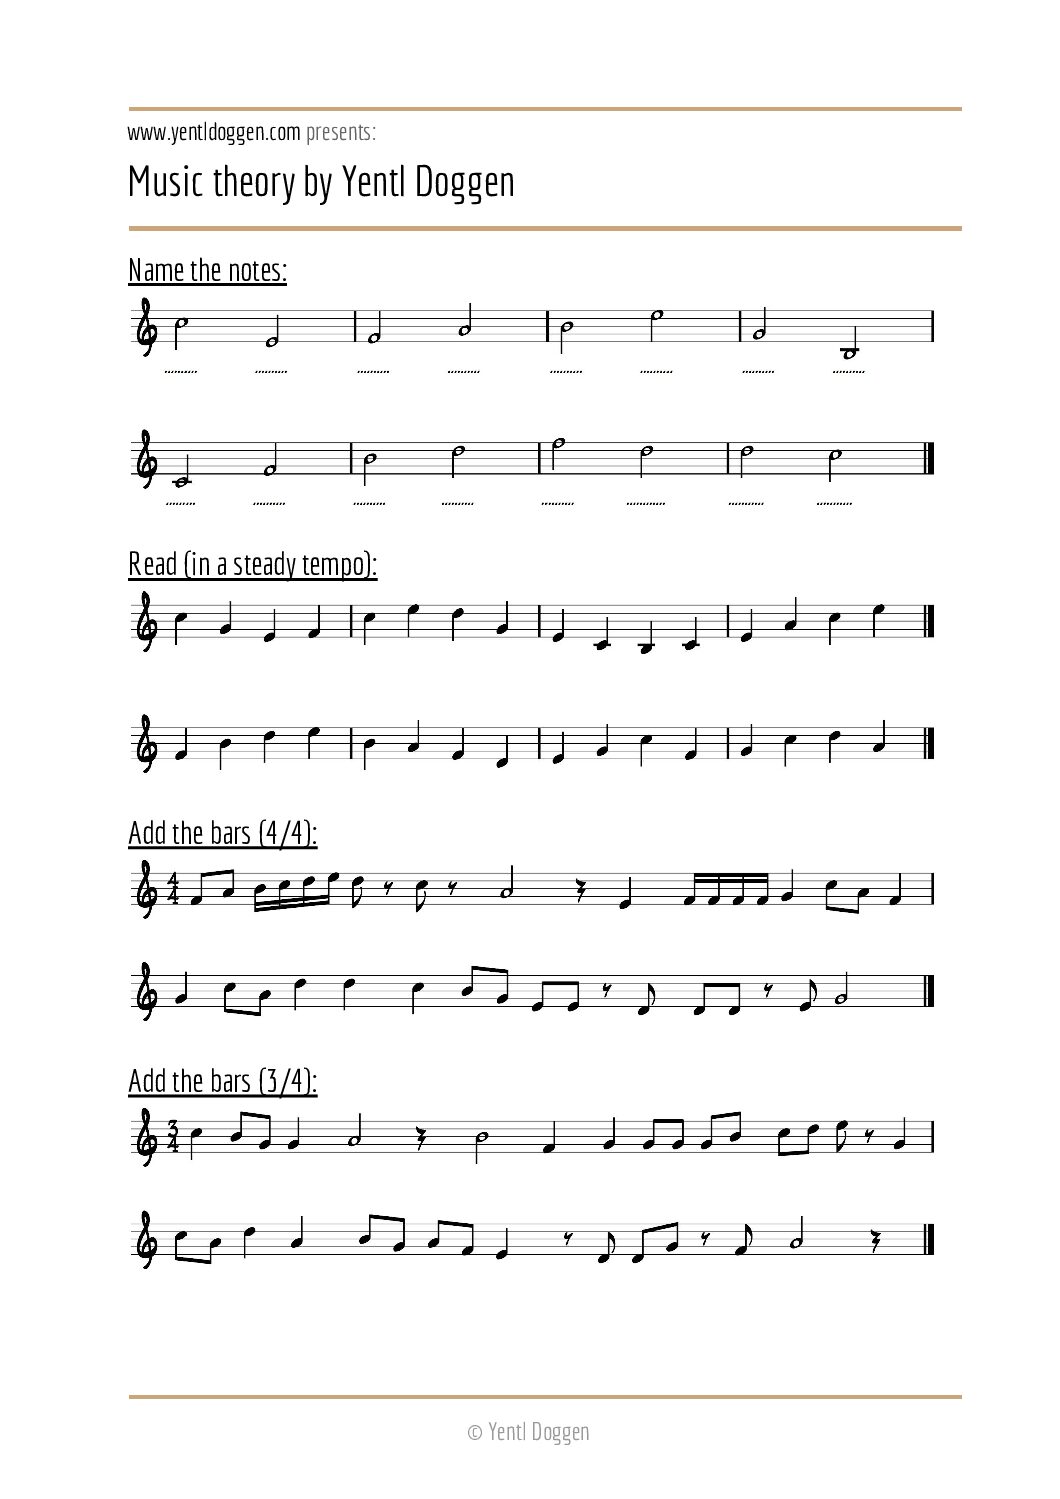 PDF for the music theory exercises for beginners